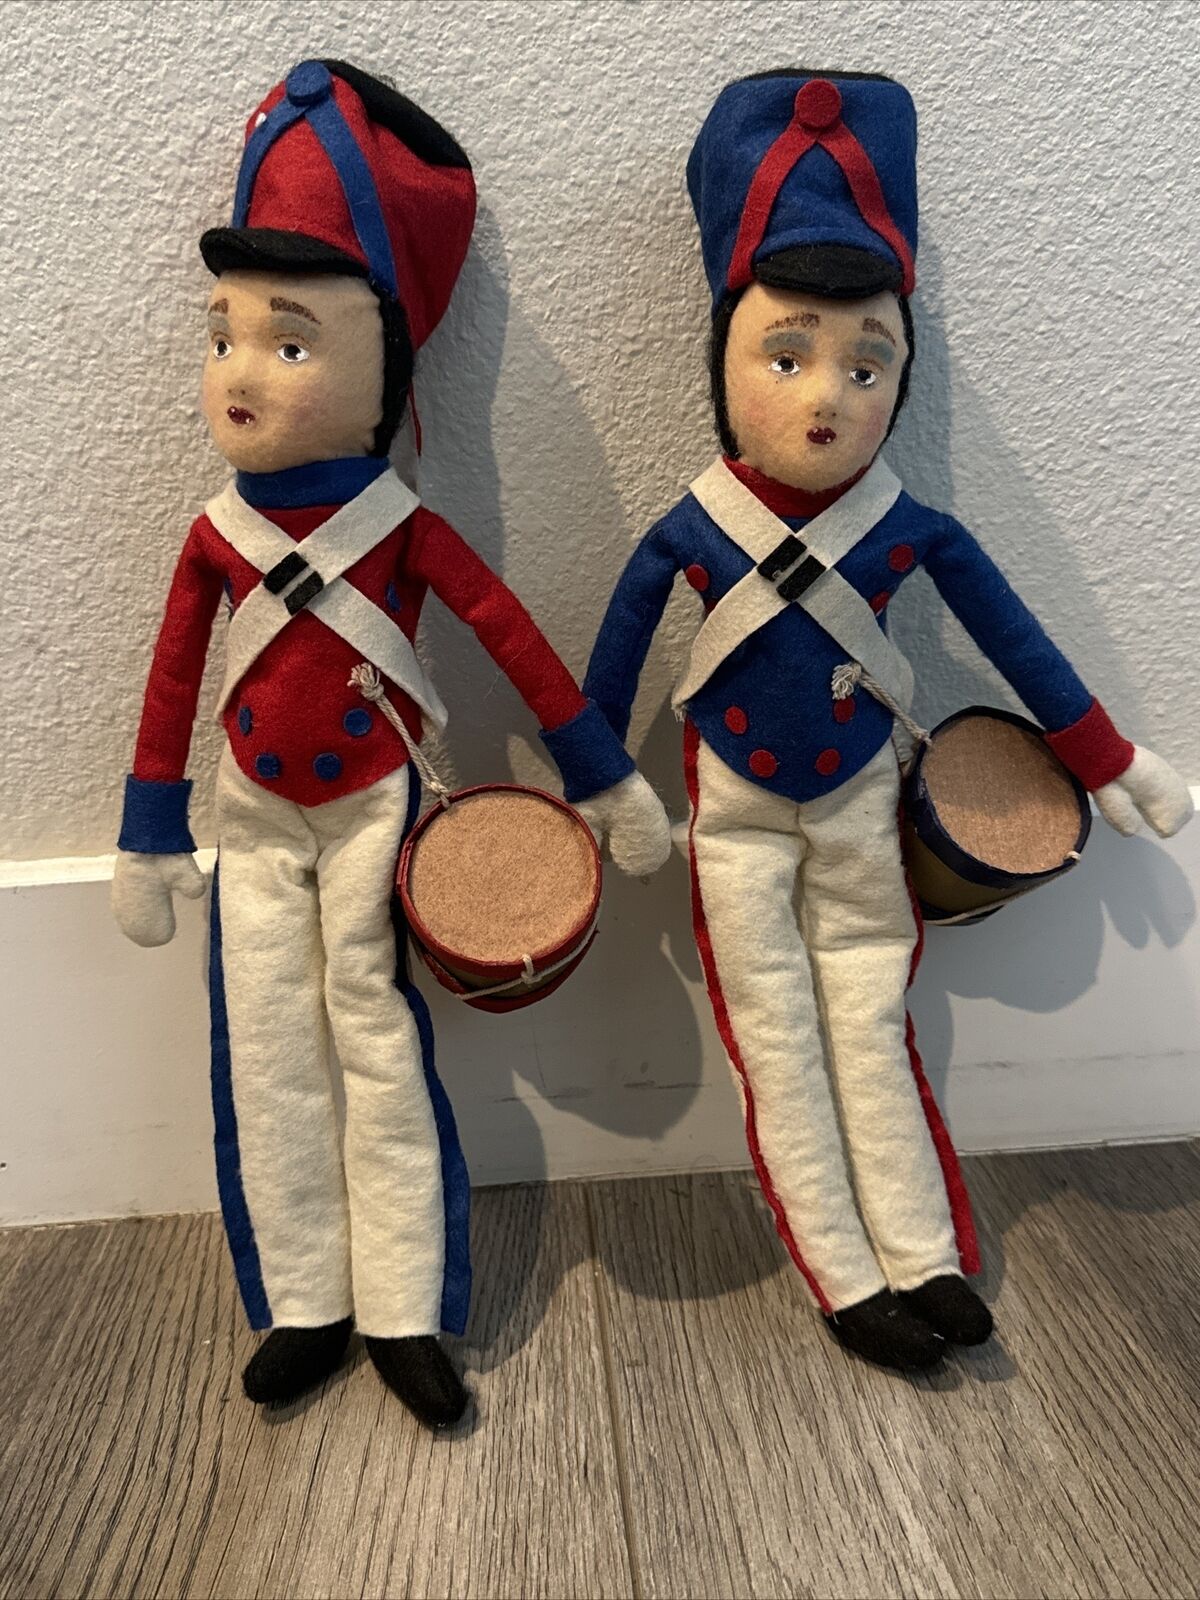 Unique Vintage Handmade Large Red/Blue fabric Drummer Boy Christmas Collectible